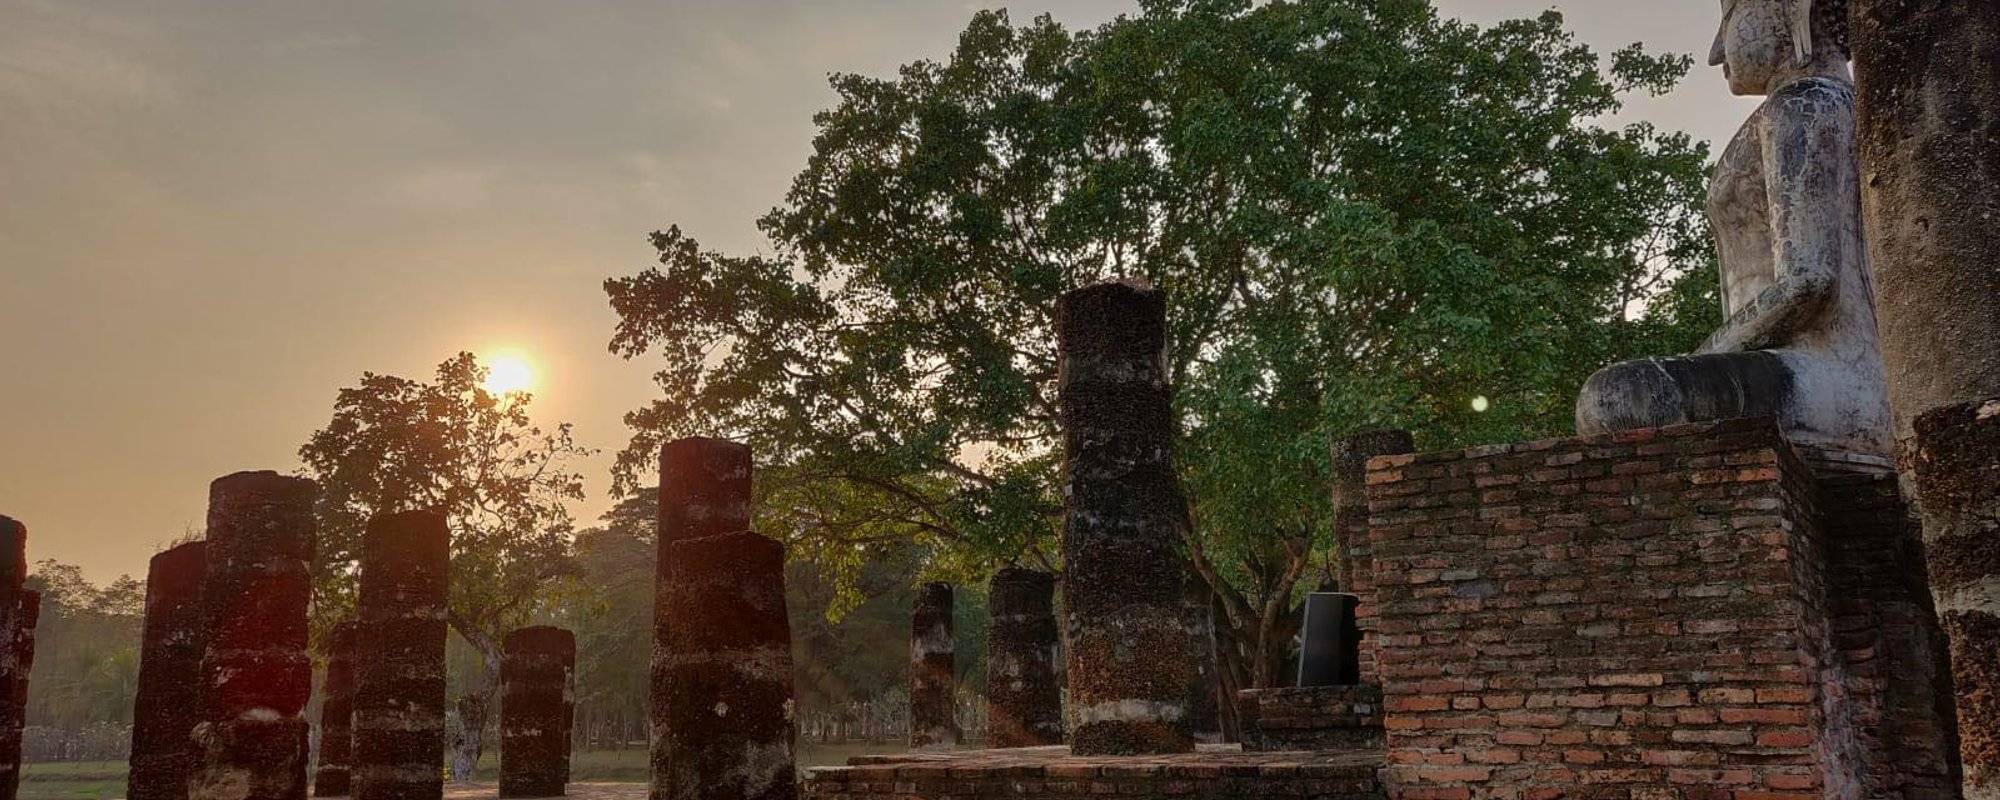 Thailand Part 9: The Temples of Sukhothai at Sunrise & A little scooter drive through the rice fields